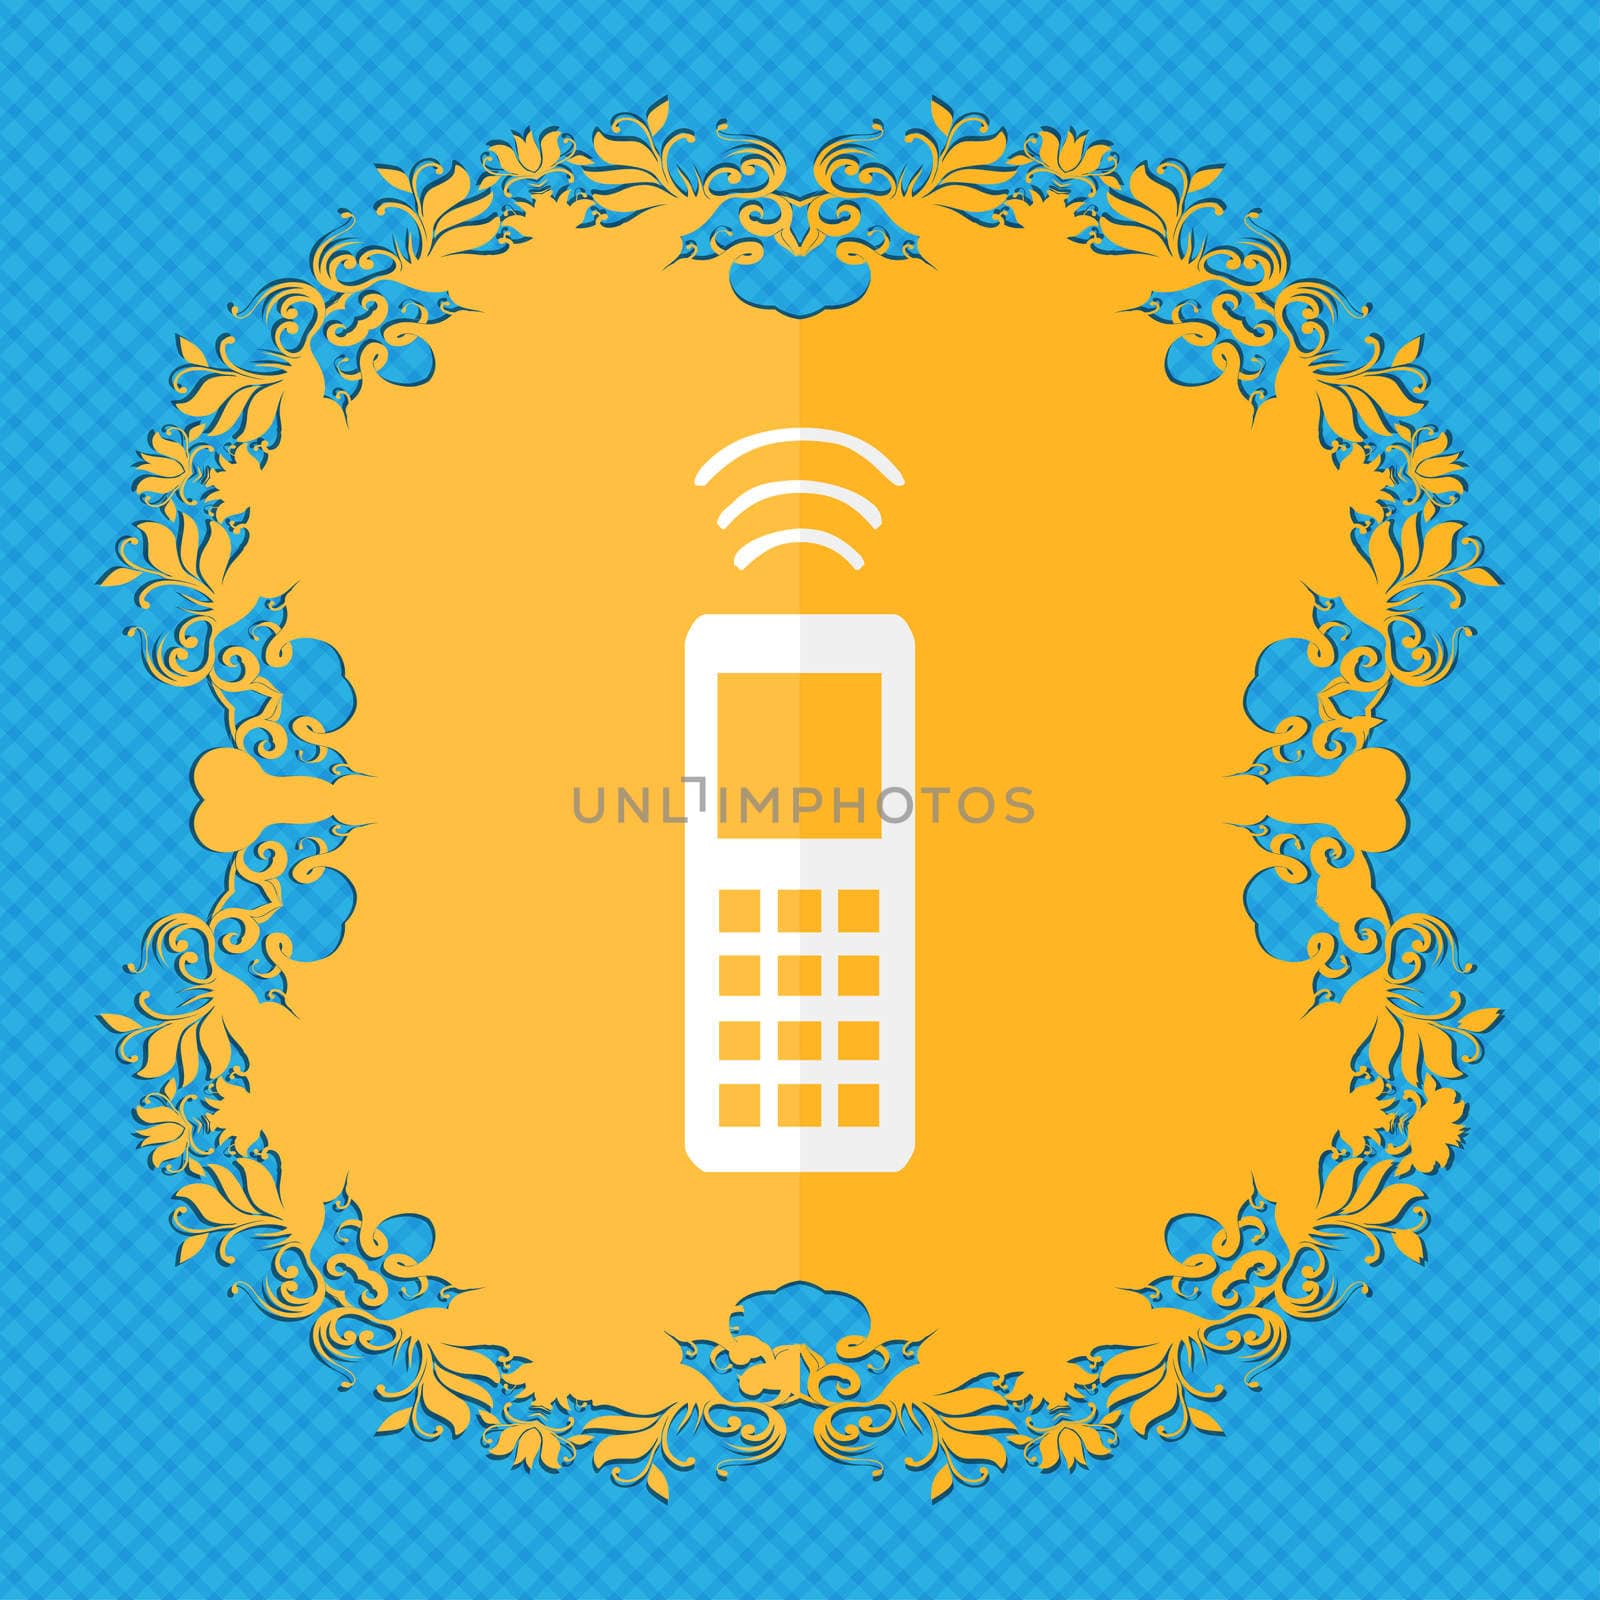 the remote control. Floral flat design on a blue abstract background with place for your text.  by serhii_lohvyniuk